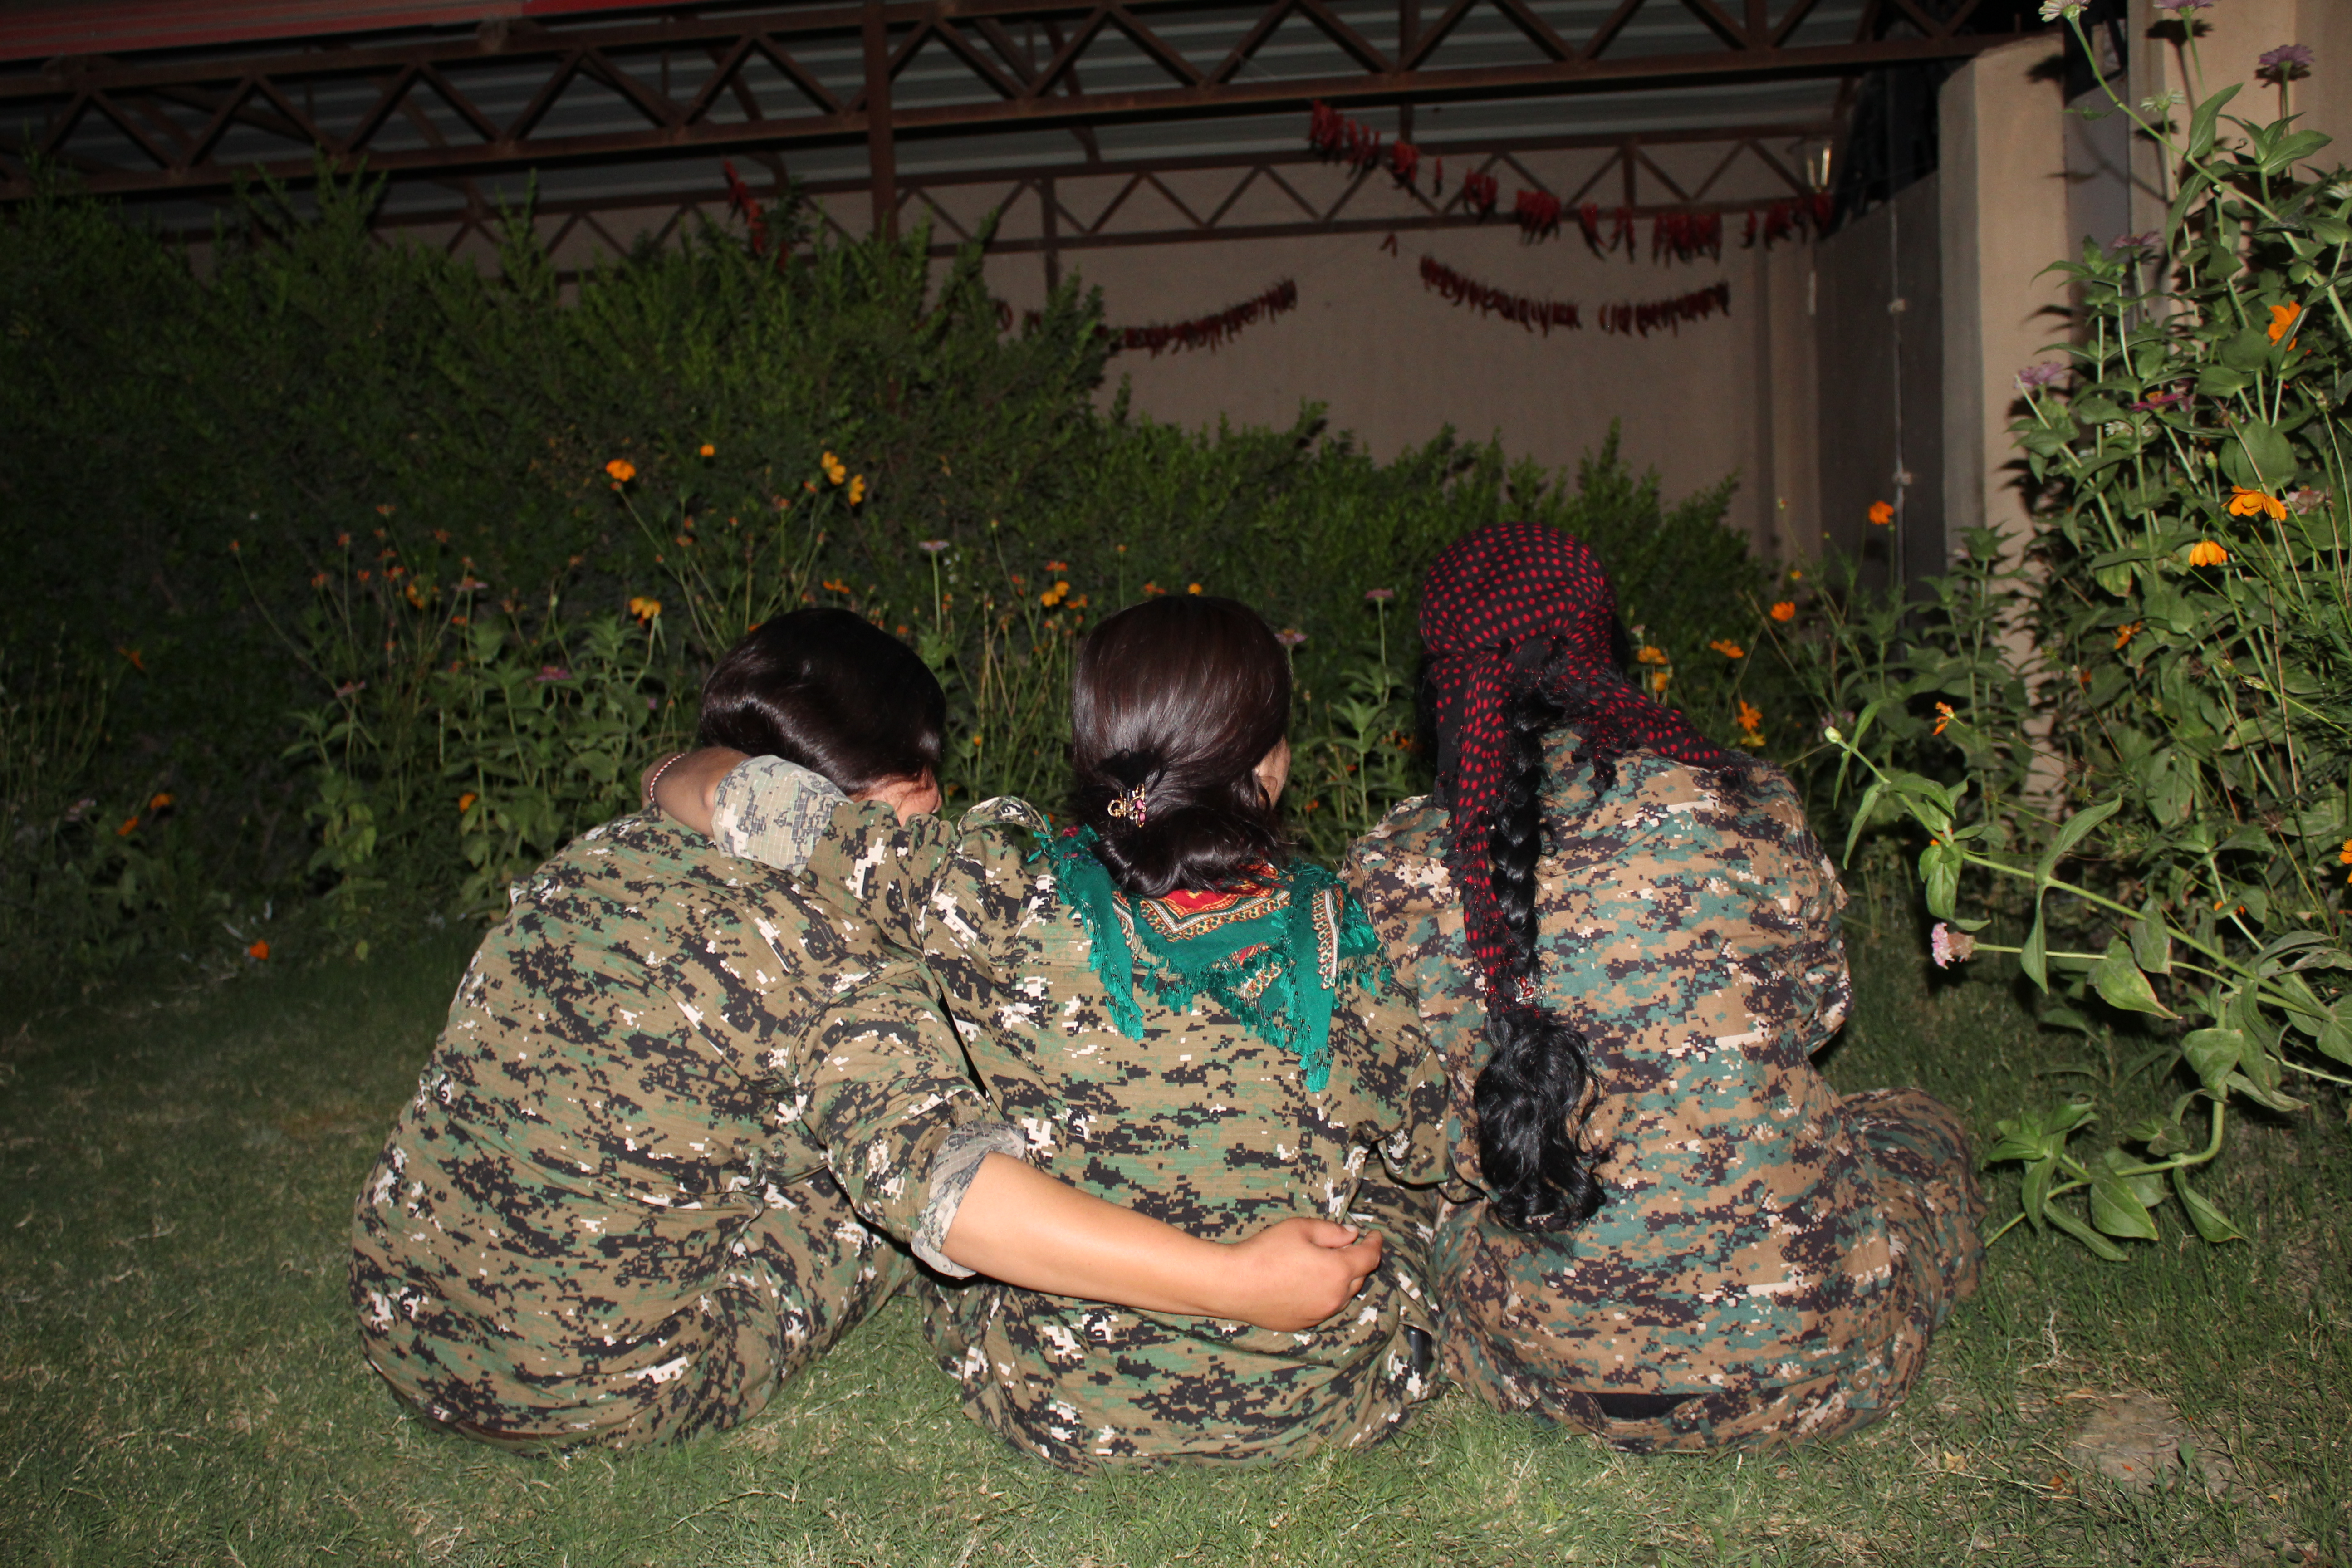 After the Êzidî genocide: a week of interviews with women in Shengal